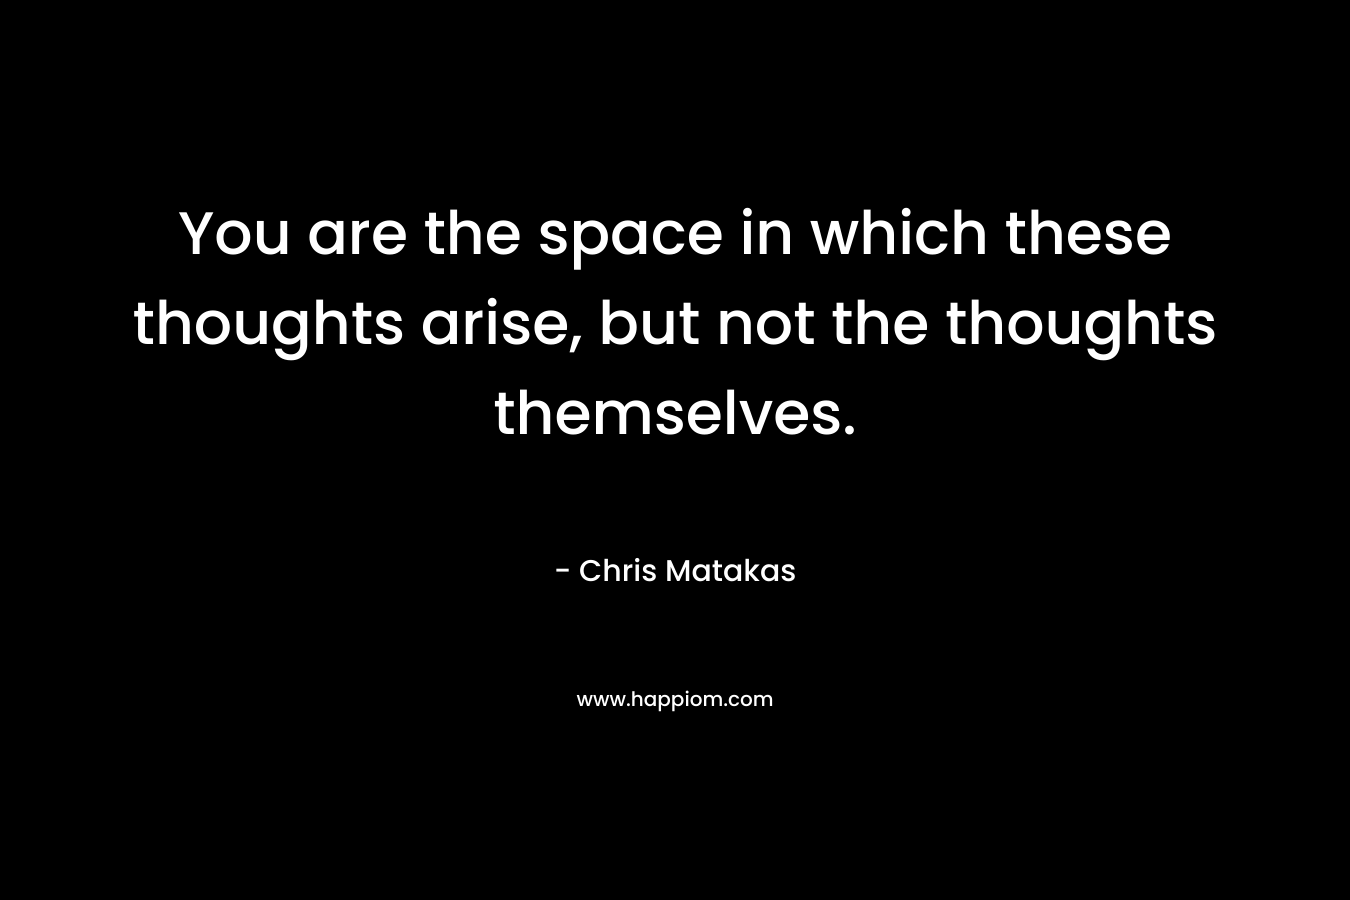 You are the space in which these thoughts arise, but not the thoughts themselves.